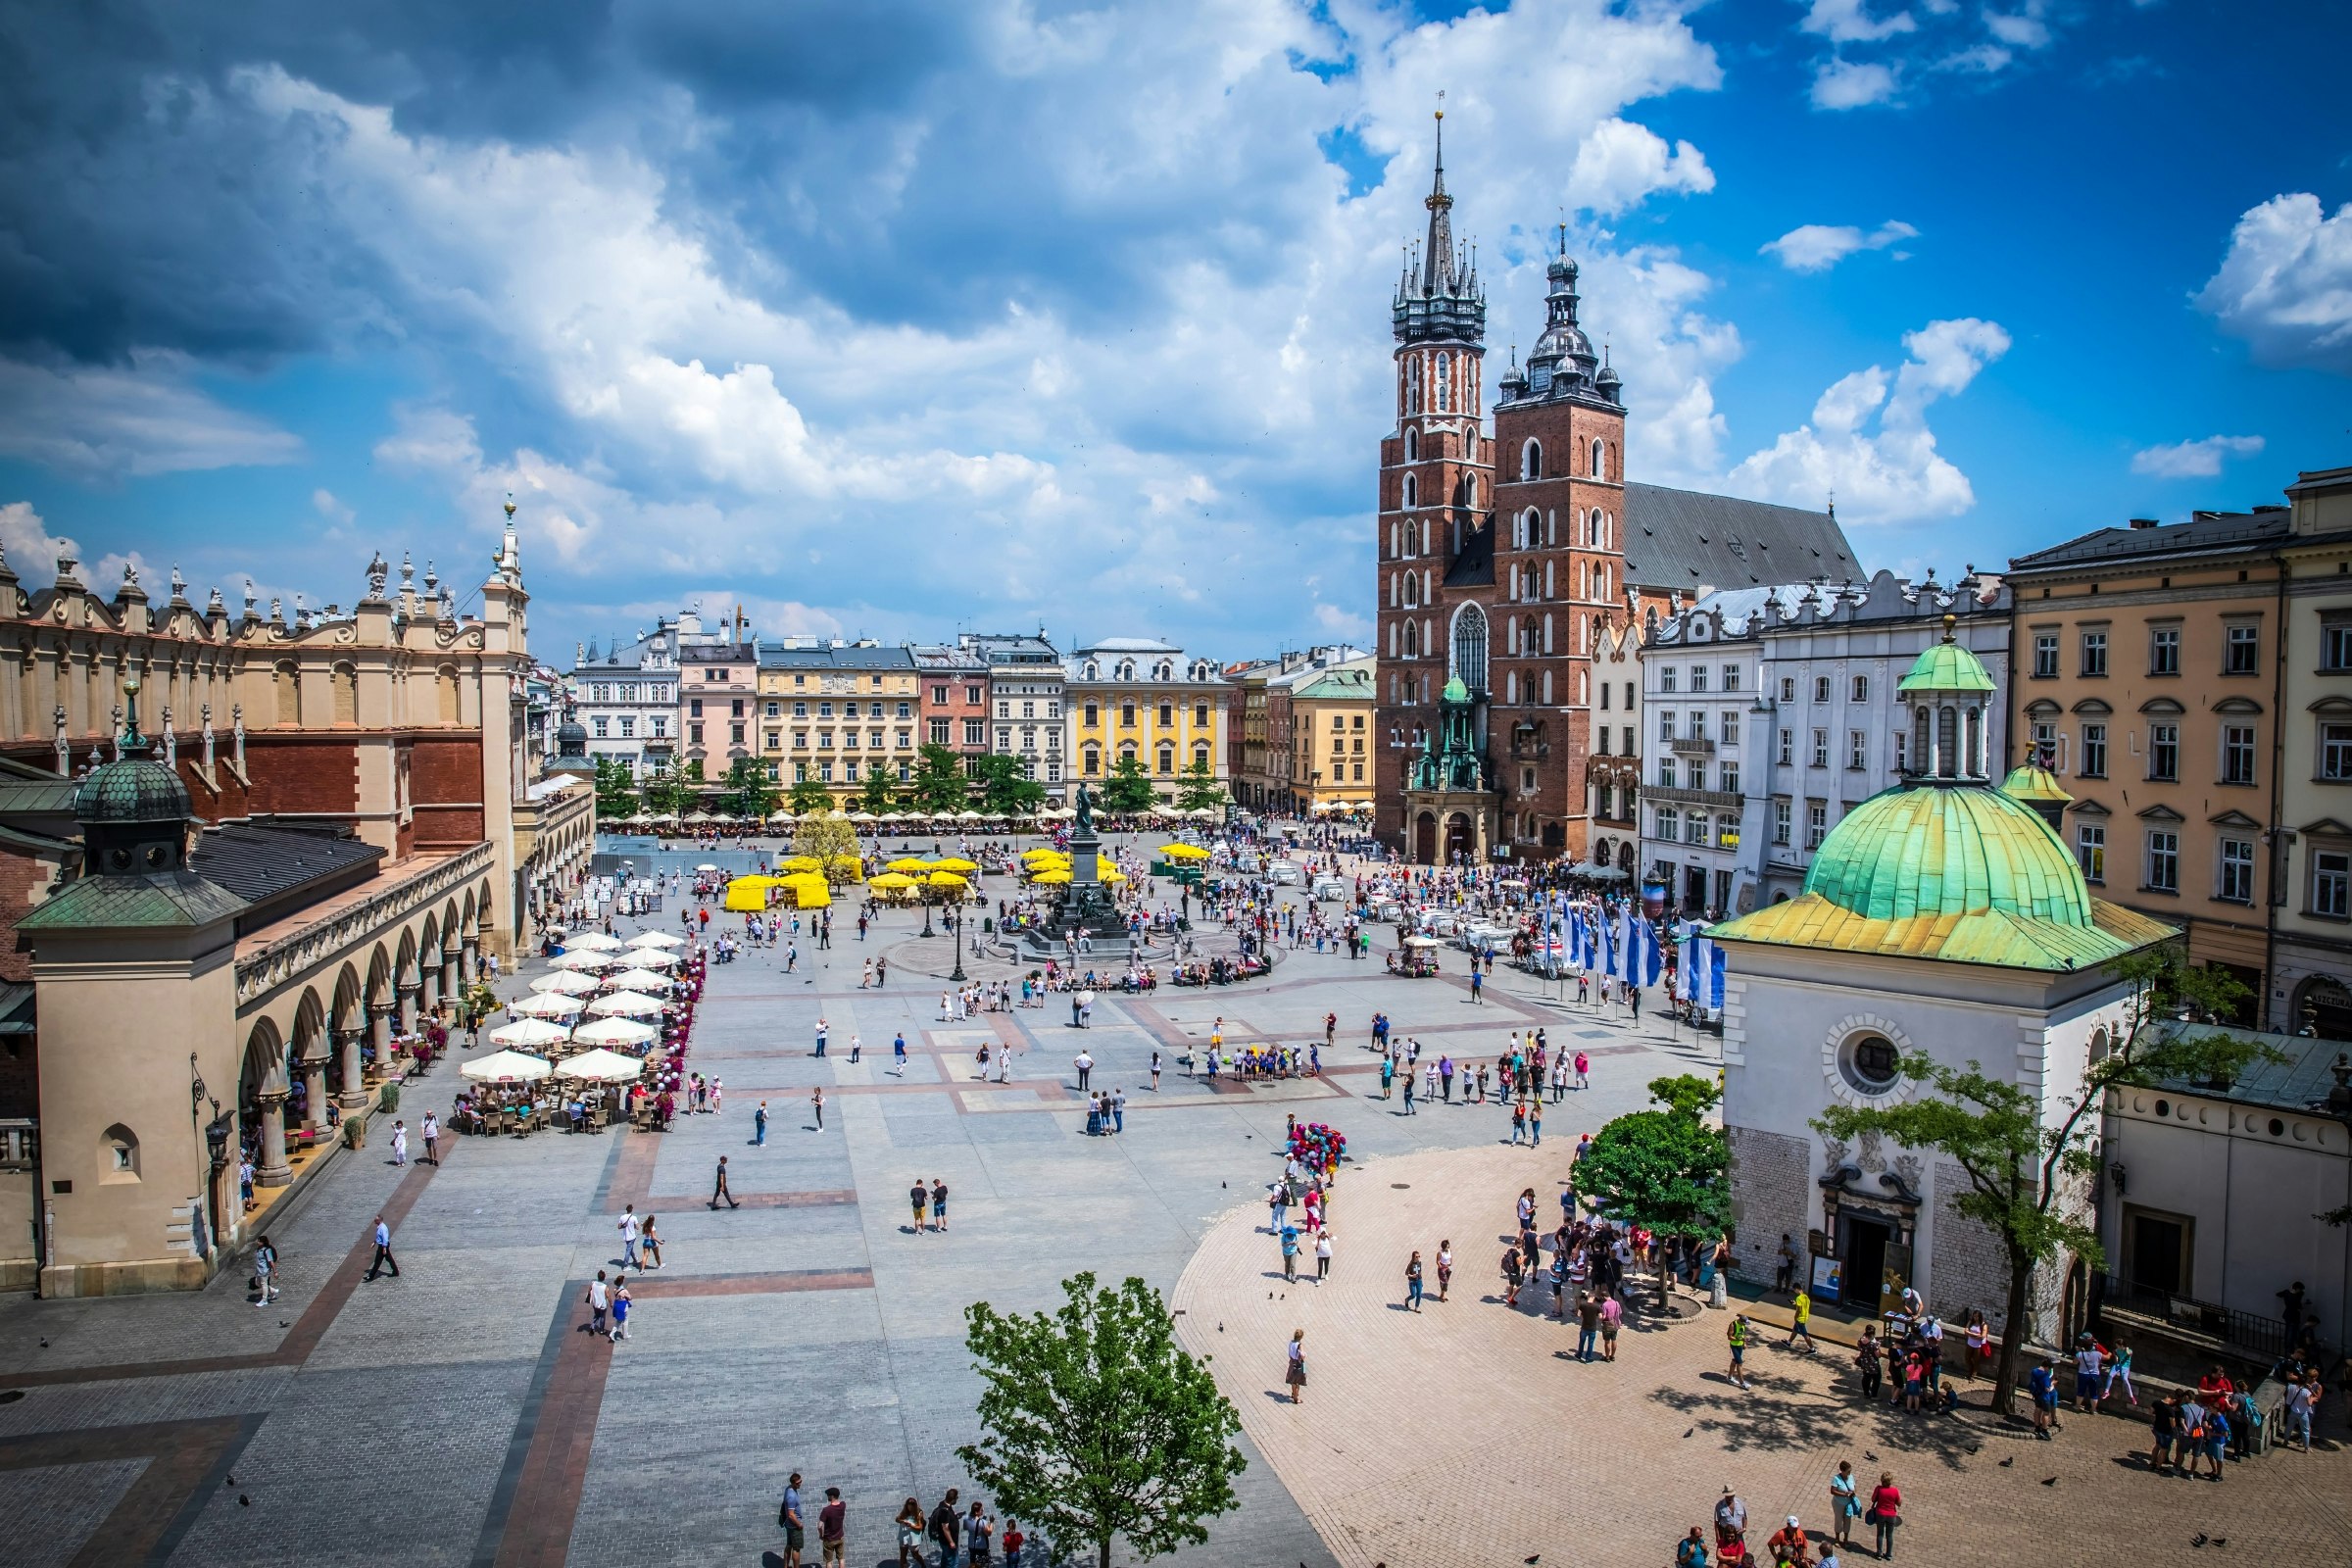 An aerial view of the main square in the Polish city of Kraków. People wander around the large open space, which is flanked by buildings and has a small market place operating in it.